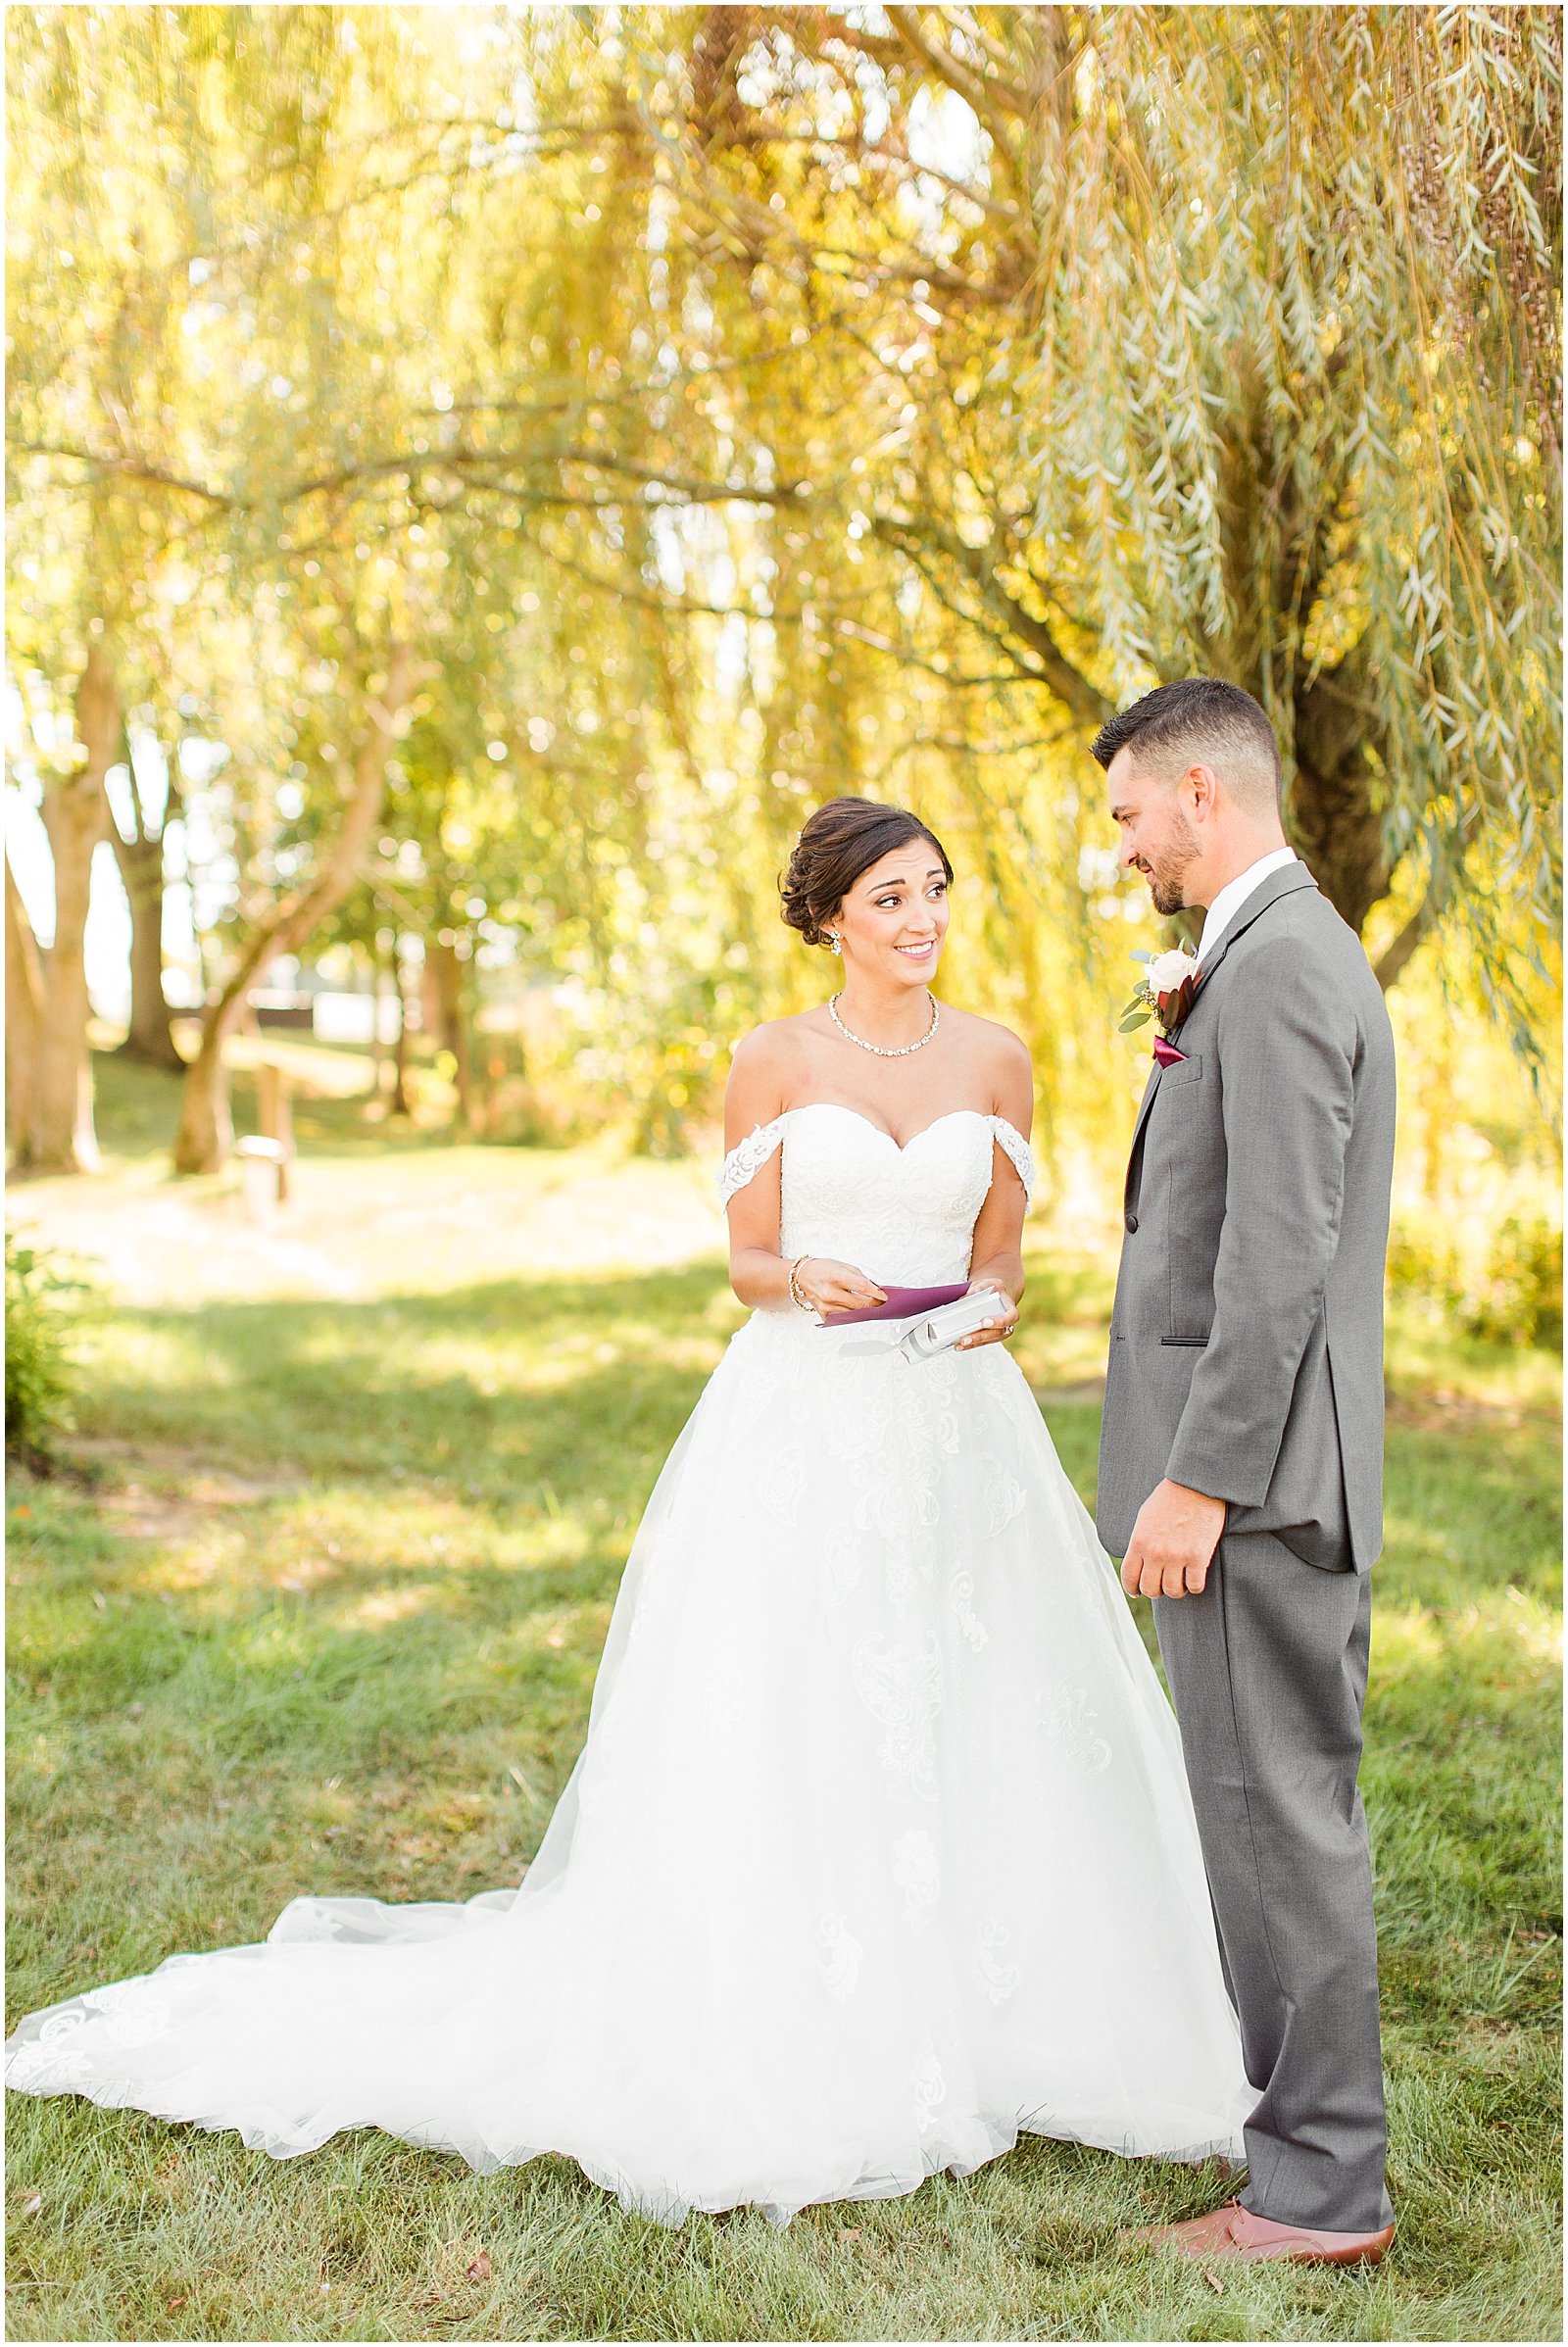 A Stunning Fall Wedding in Indianapolis, IN |. Sally and Andrew | Bret and Brandie Photography 0053.jpg